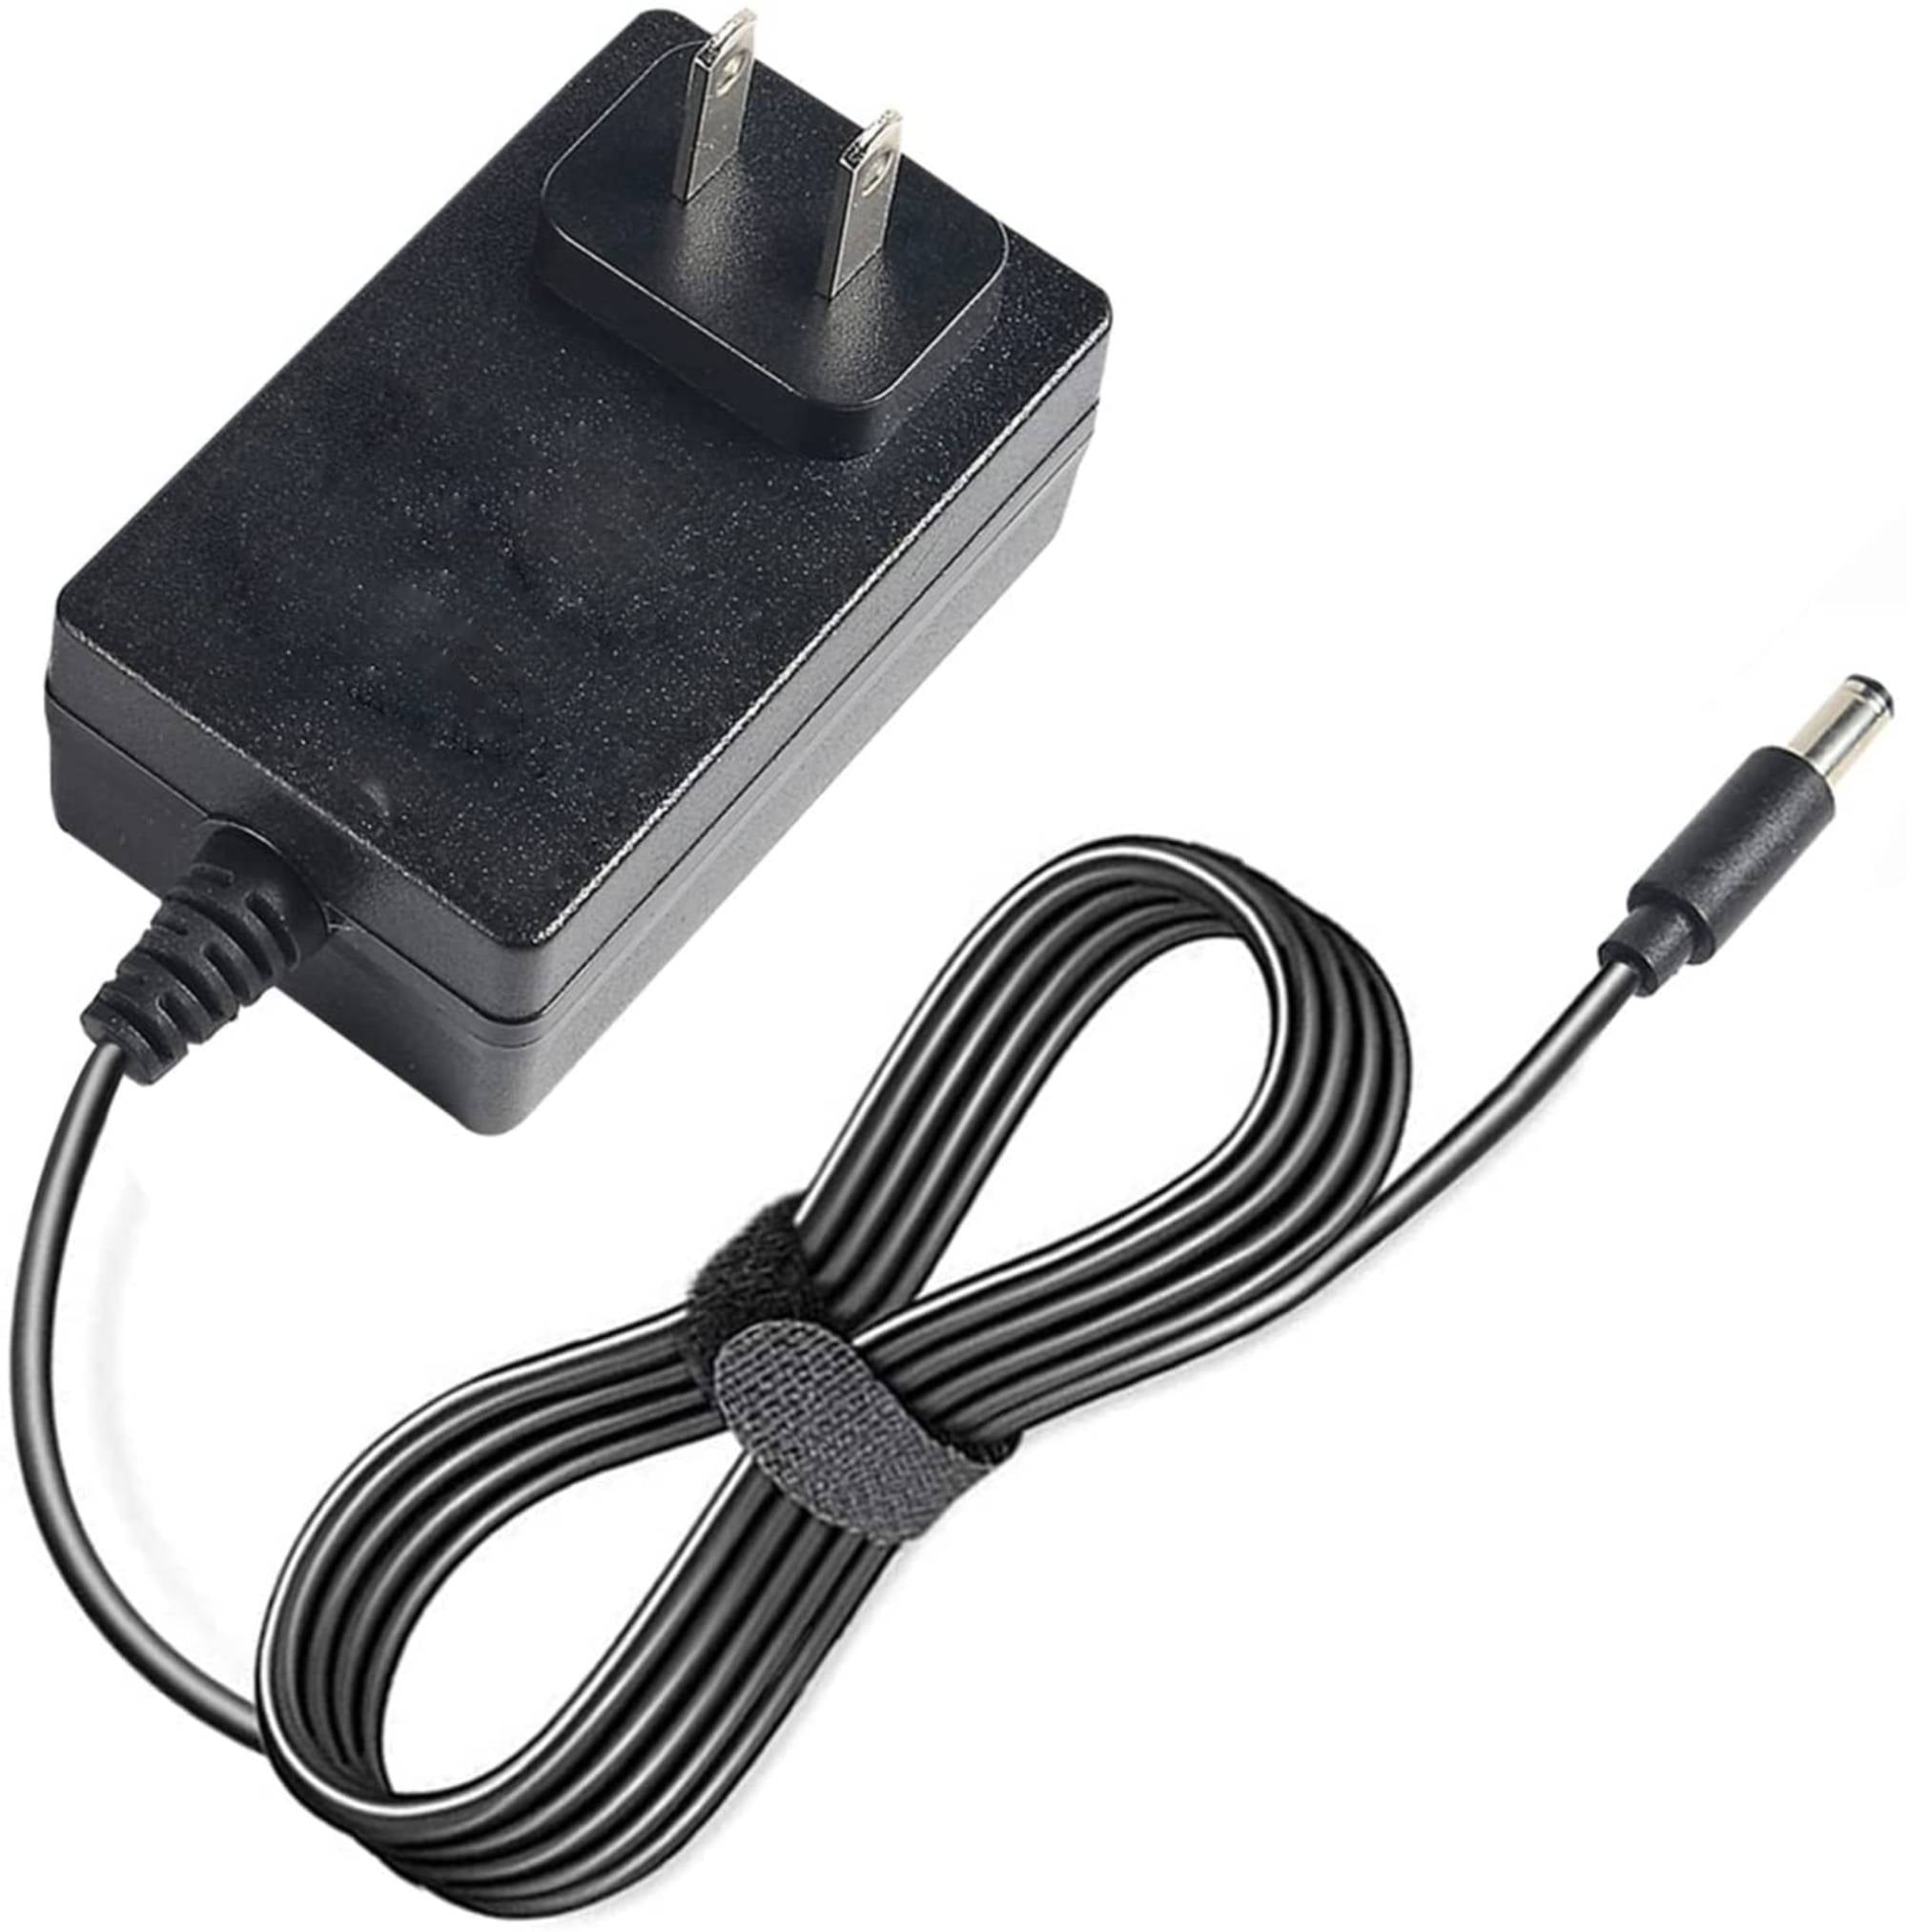 AC DC Adapter for Model SUN-1200300B3 Shenzhen SOY Technology Power Charger 